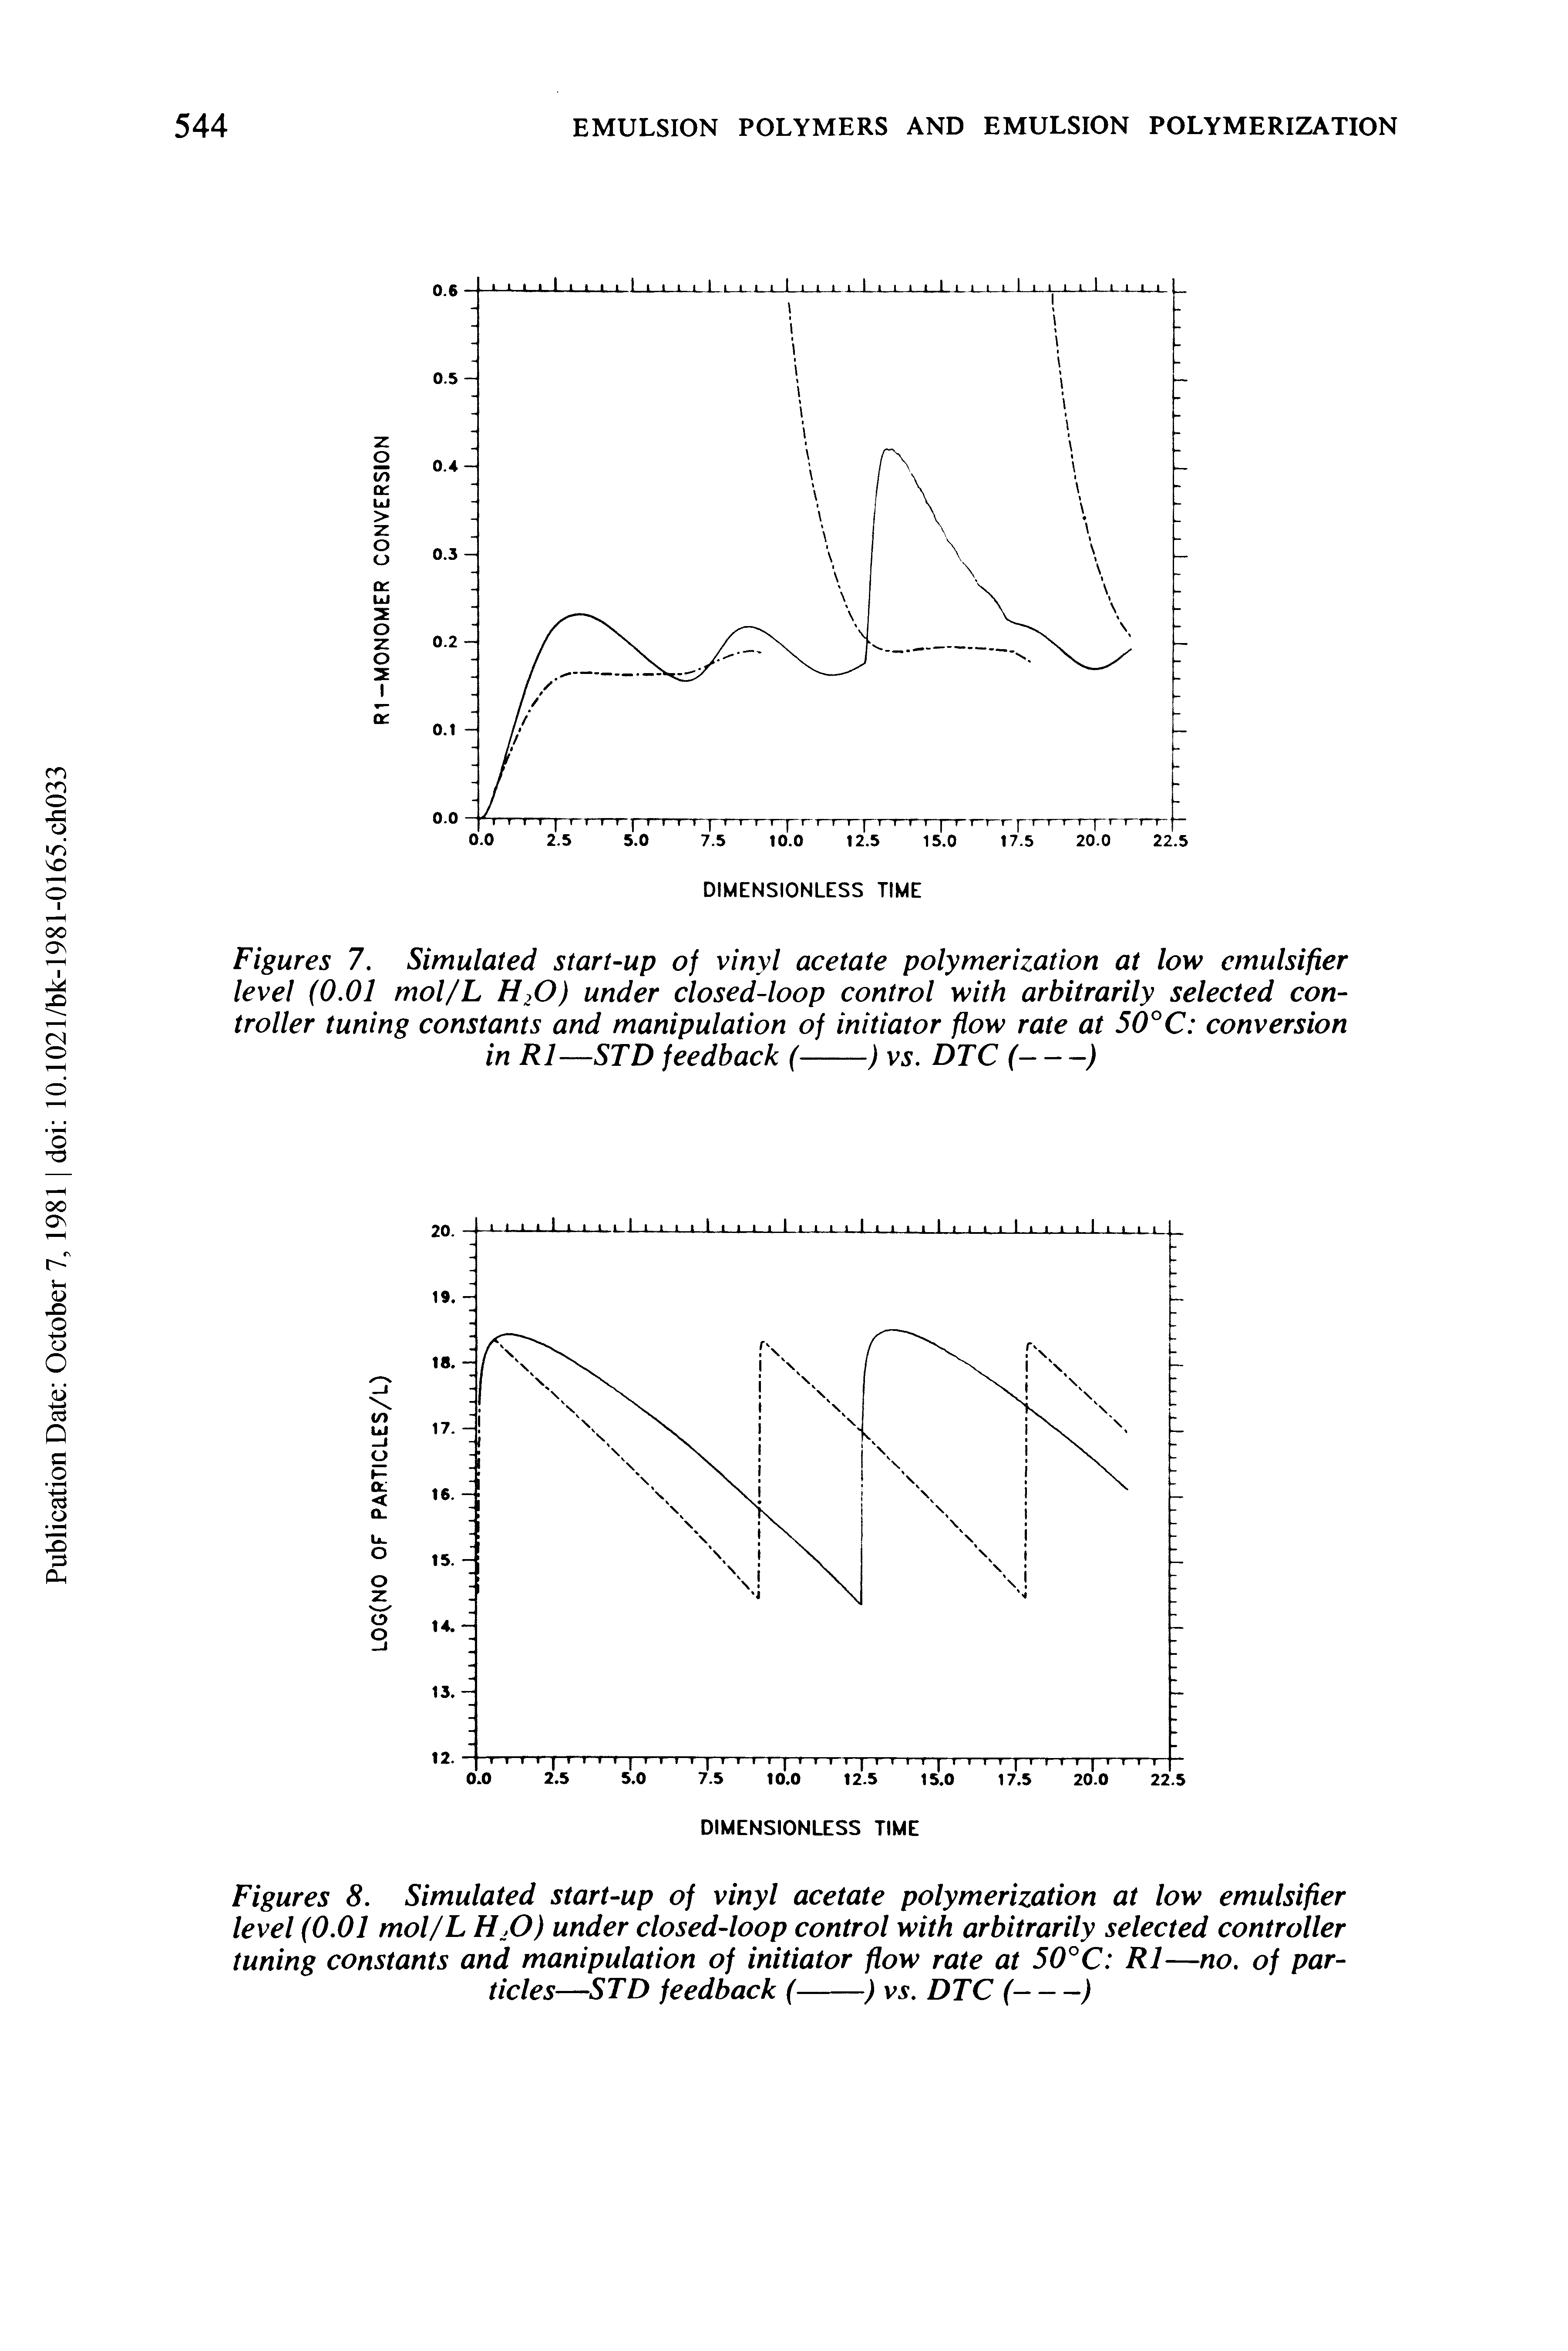 Figures 7. Simulated start-up of vinyl acetate polymerization at low emulsifier level (0.01 mol/L H20) under closed-loop control with arbitrarily selected controller tuning constants and manipulation of initiator flow rate at 50°C conversion in R1—STD feedback (--------------------------) vs. DTC (----)...